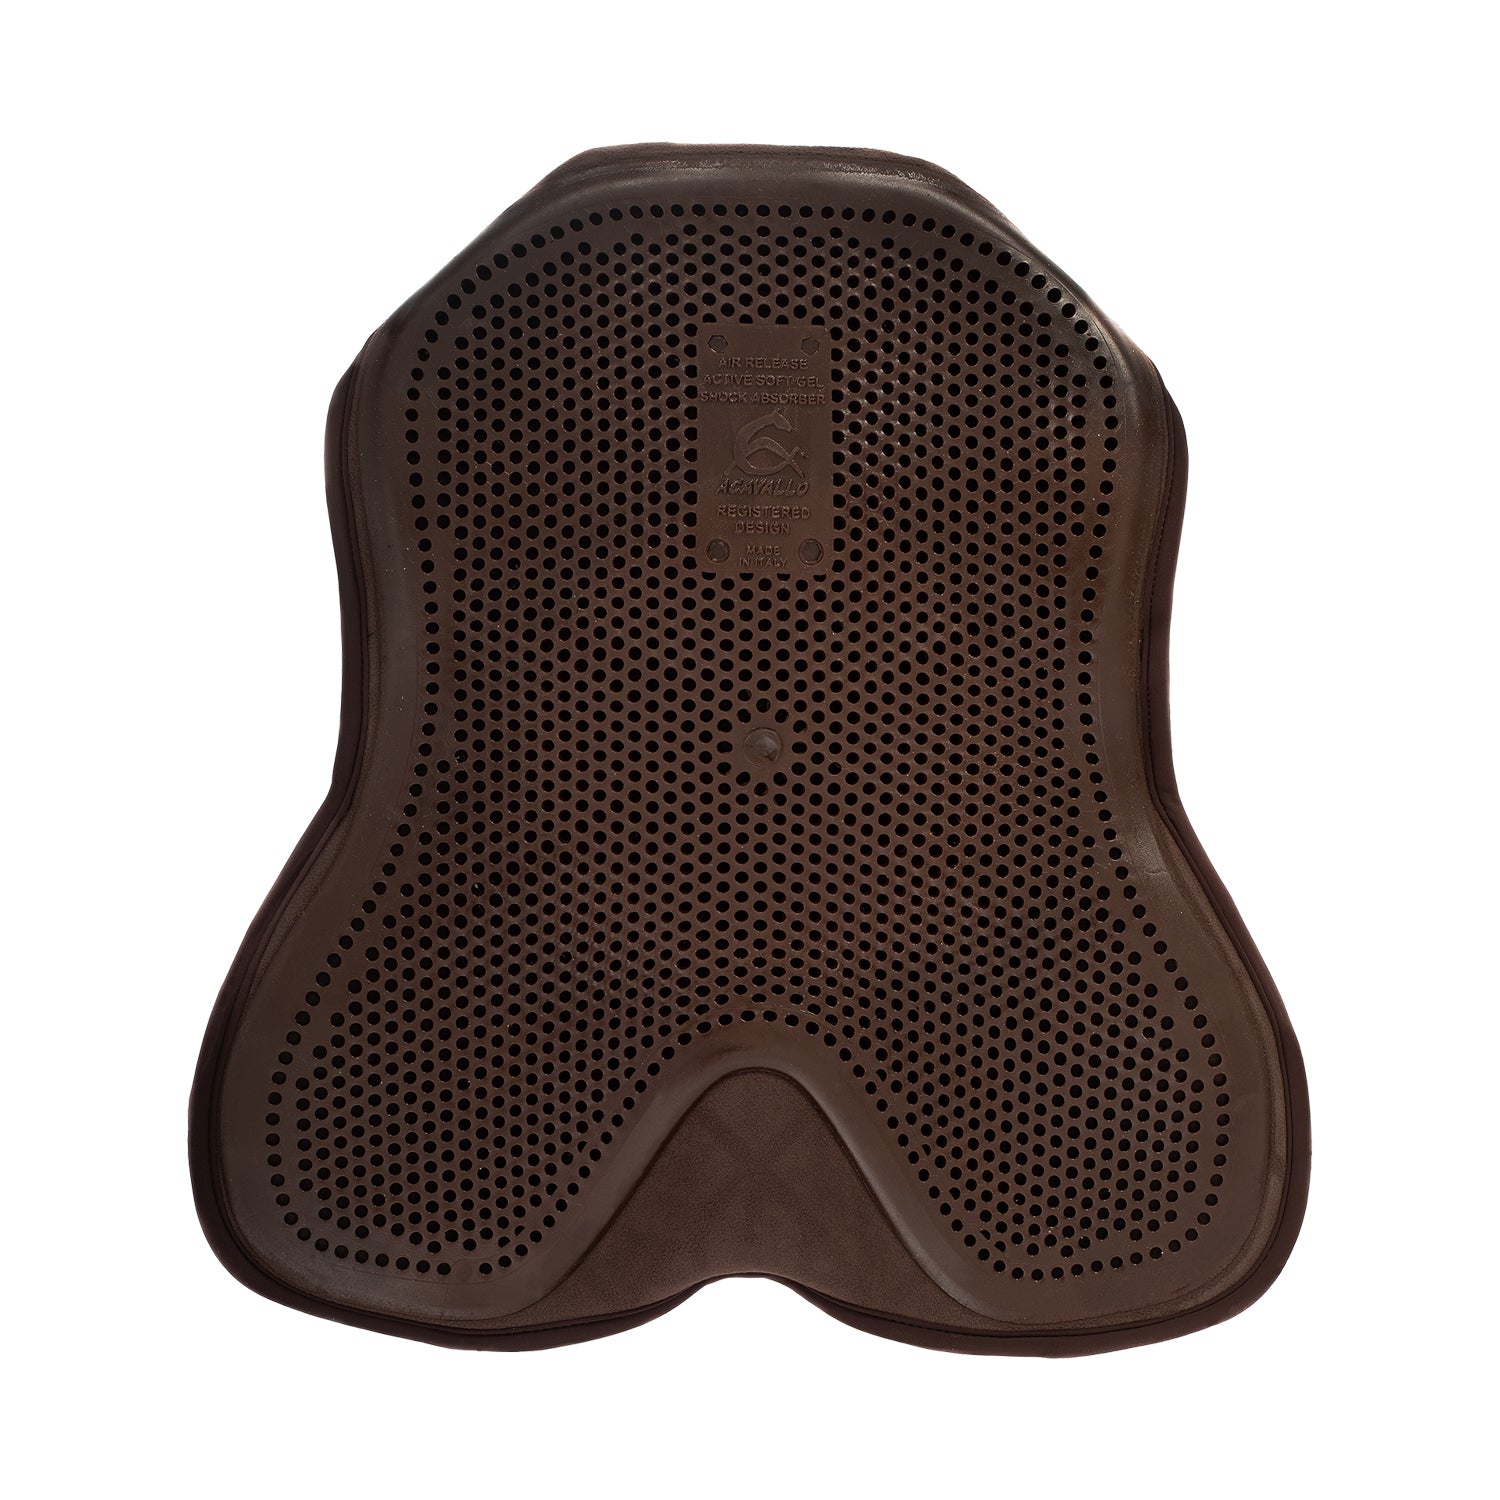 Gel Seat Cover for saddles